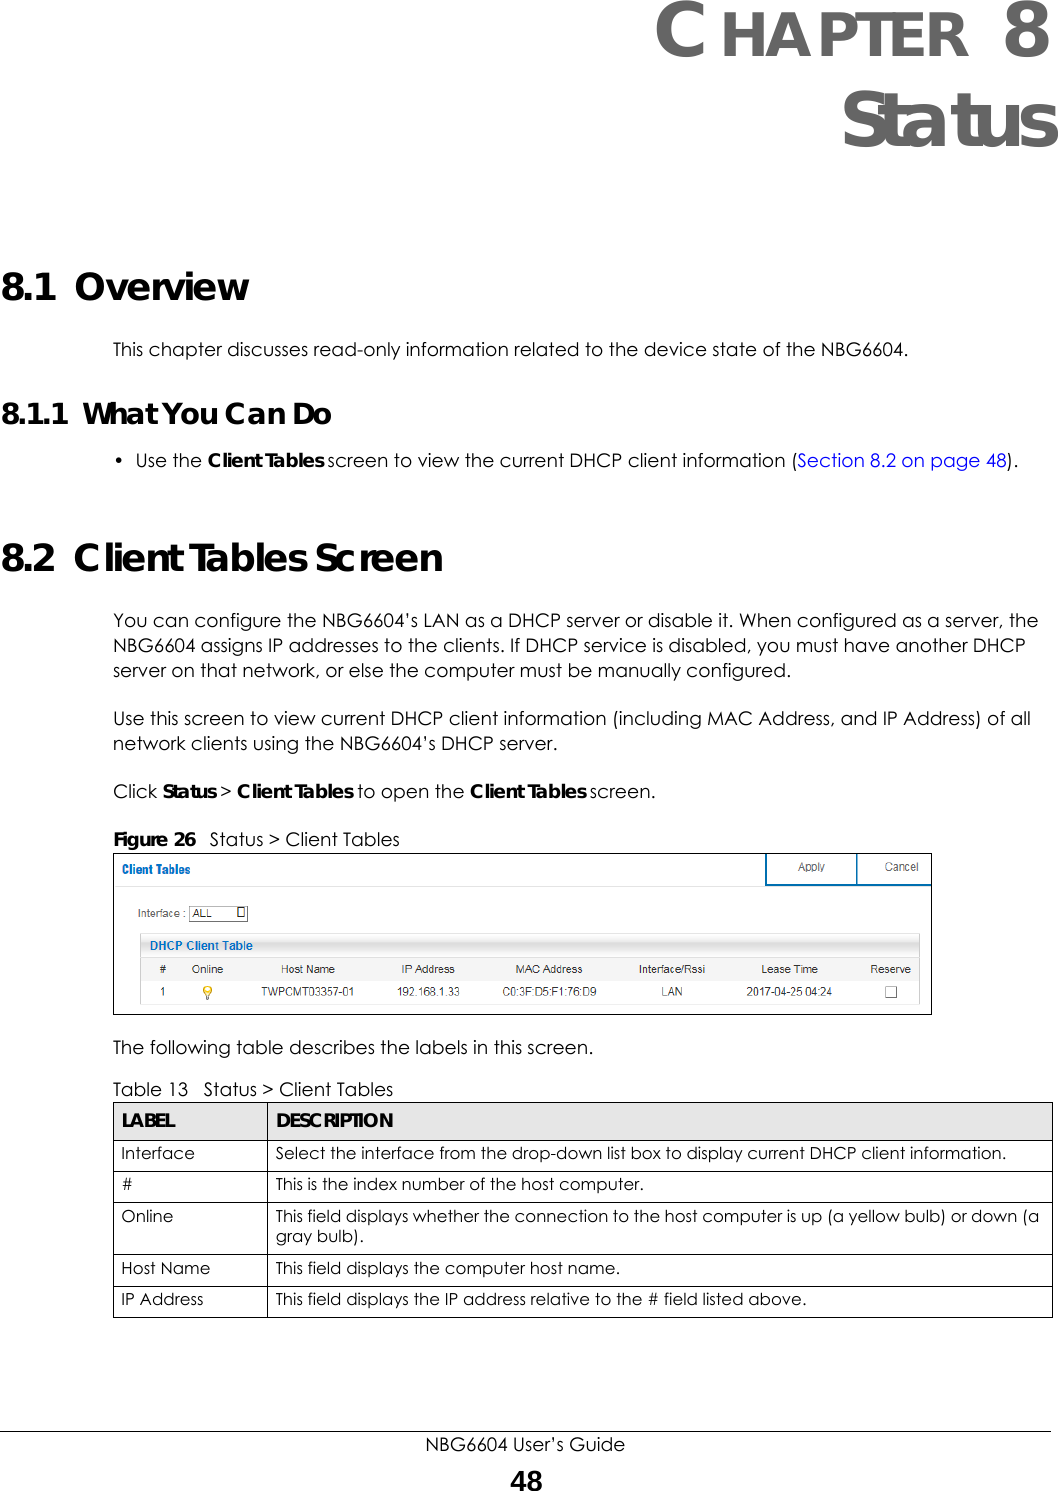 NBG6604 User’s Guide48CHAPTER 8 Status8.1  OverviewThis chapter discusses read-only information related to the device state of the NBG6604.8.1.1  What You Can Do• Use the Client Tables screen to view the current DHCP client information (Section 8.2 on page 48). 8.2  Client Tables ScreenYou can configure the NBG6604’s LAN as a DHCP server or disable it. When configured as a server, the NBG6604 assigns IP addresses to the clients. If DHCP service is disabled, you must have another DHCP server on that network, or else the computer must be manually configured.Use this screen to view current DHCP client information (including MAC Address, and IP Address) of all network clients using the NBG6604’s DHCP server. Click Status &gt; Client Tables to open the Client Tables screen.Figure 26   Status &gt; Client TablesThe following table describes the labels in this screen.Table 13   Status &gt; Client TablesLABEL  DESCRIPTIONInterface Select the interface from the drop-down list box to display current DHCP client information.#  This is the index number of the host computer.Online This field displays whether the connection to the host computer is up (a yellow bulb) or down (a gray bulb).Host Name This field displays the computer host name.IP Address This field displays the IP address relative to the # field listed above.